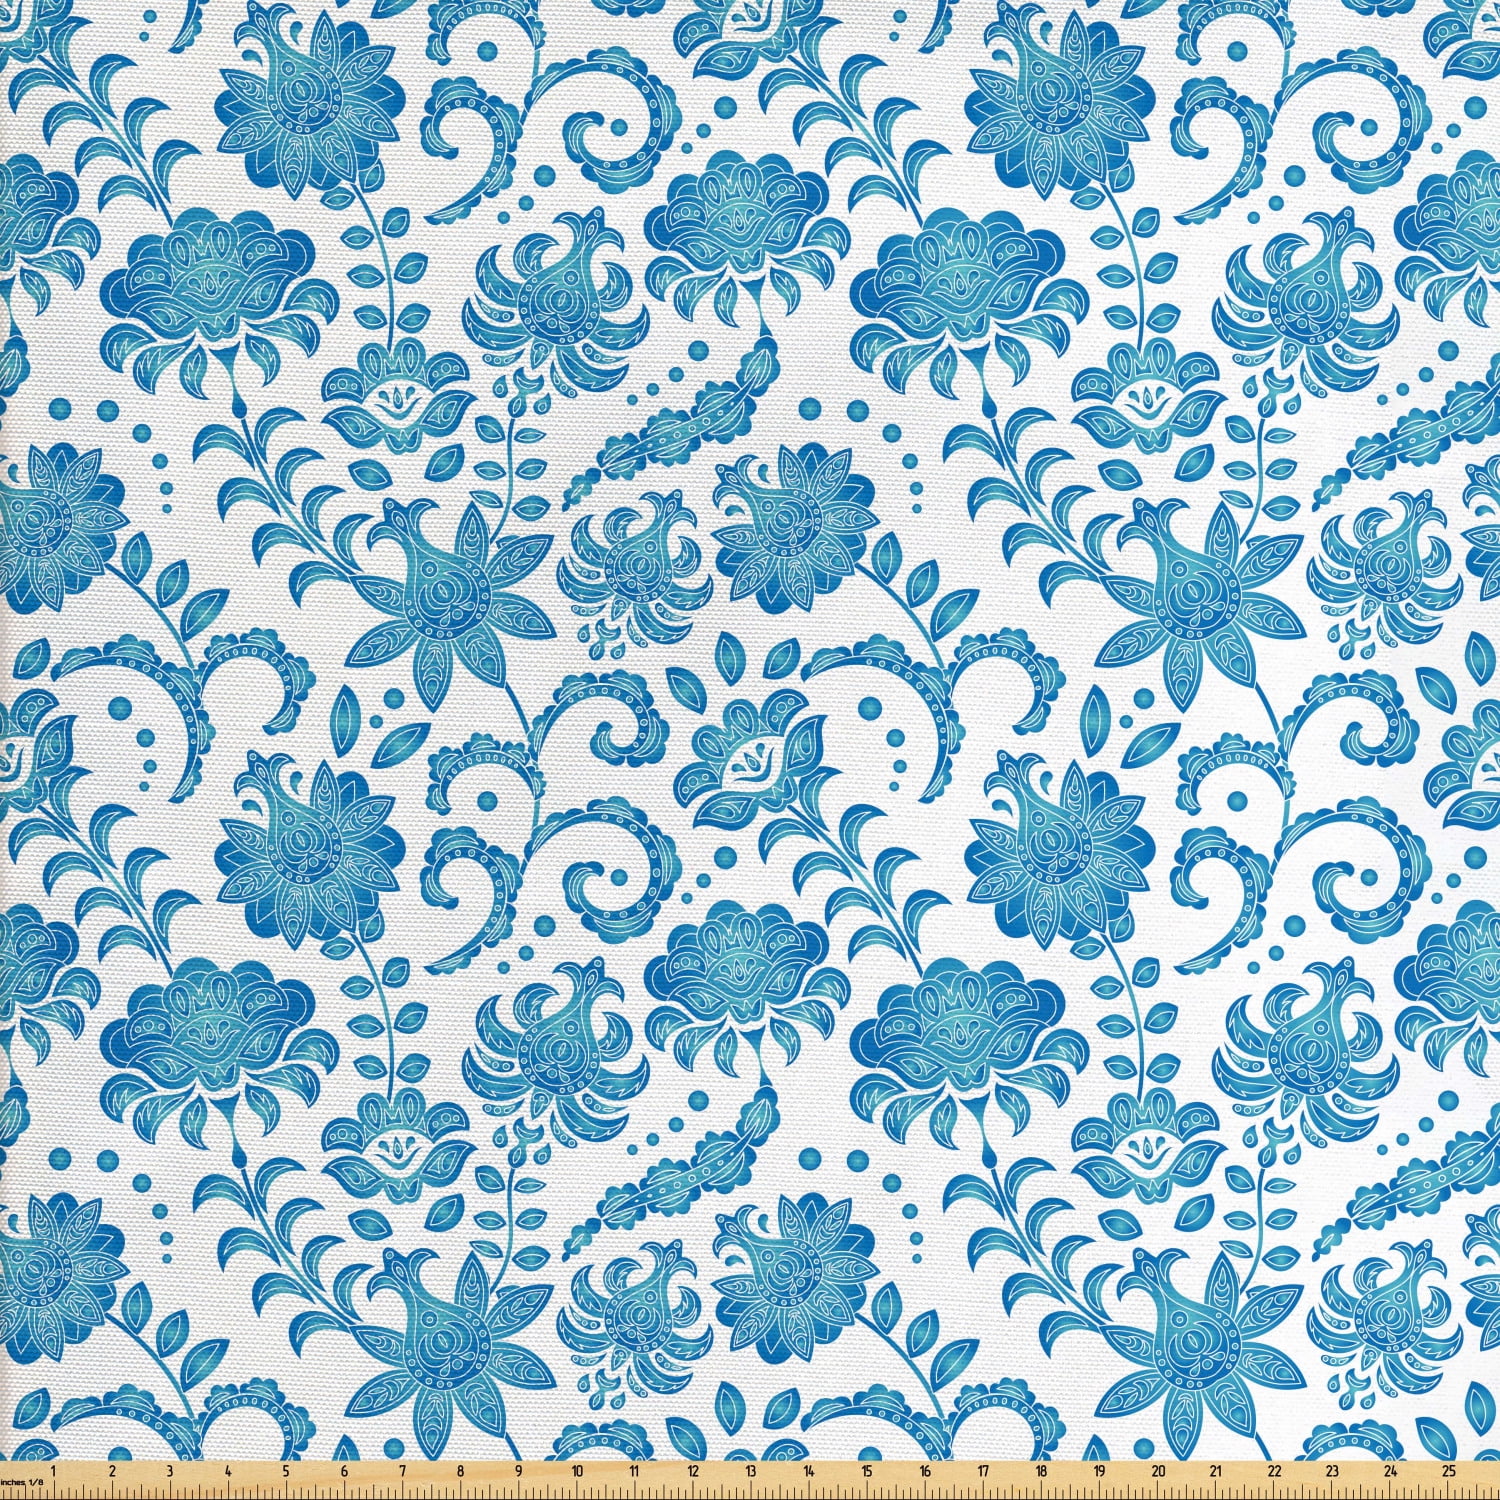 Floral Fabric by The Yard, Pattern of Bluish Flowers and Leaves on ...